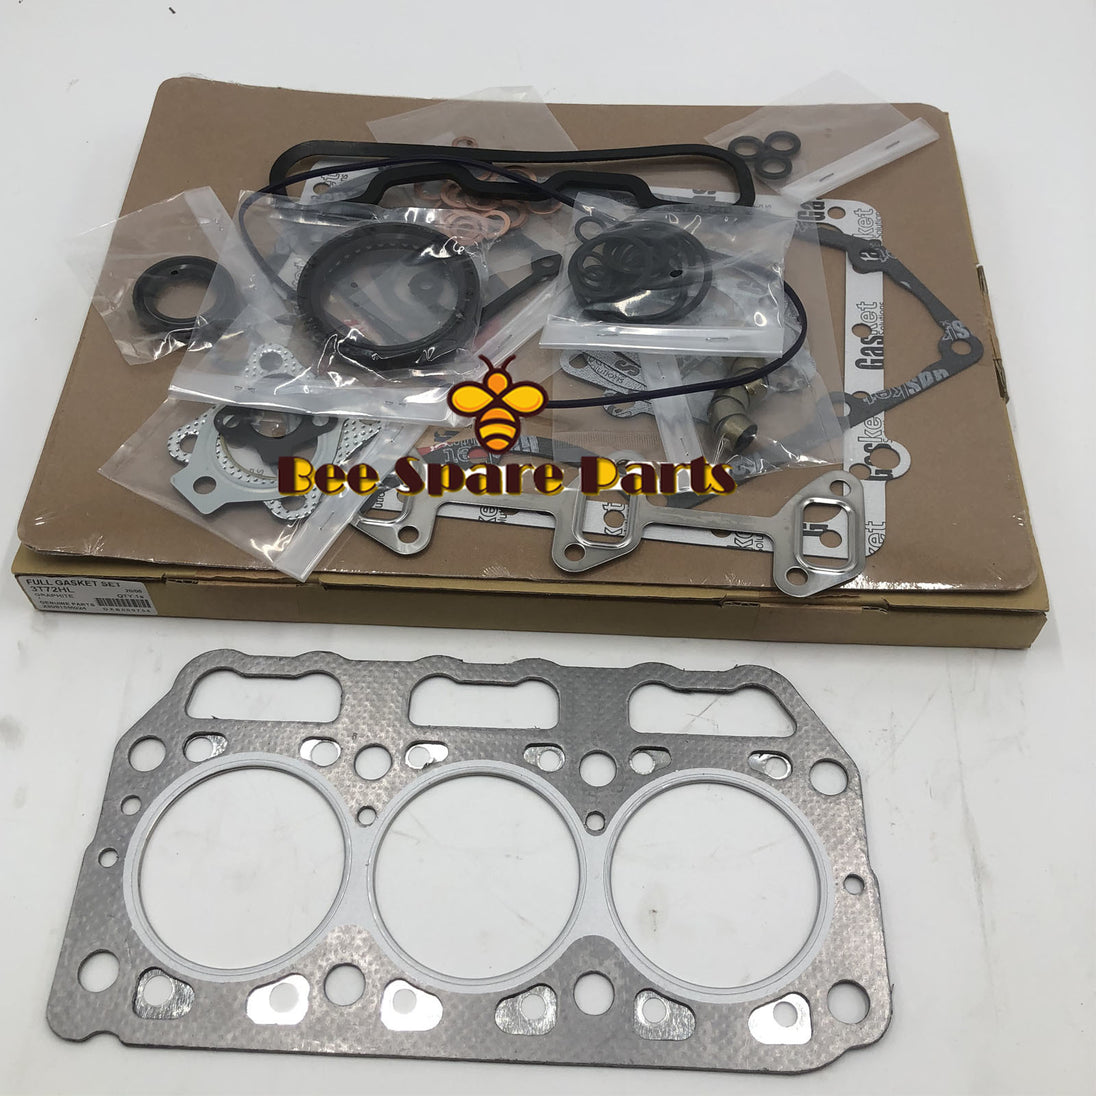 3T72HA Full Overhaul Gasket Kit With Cylinder Head Gasket 121550-01331 For Yanmar Engine Parts 3T72HA-A